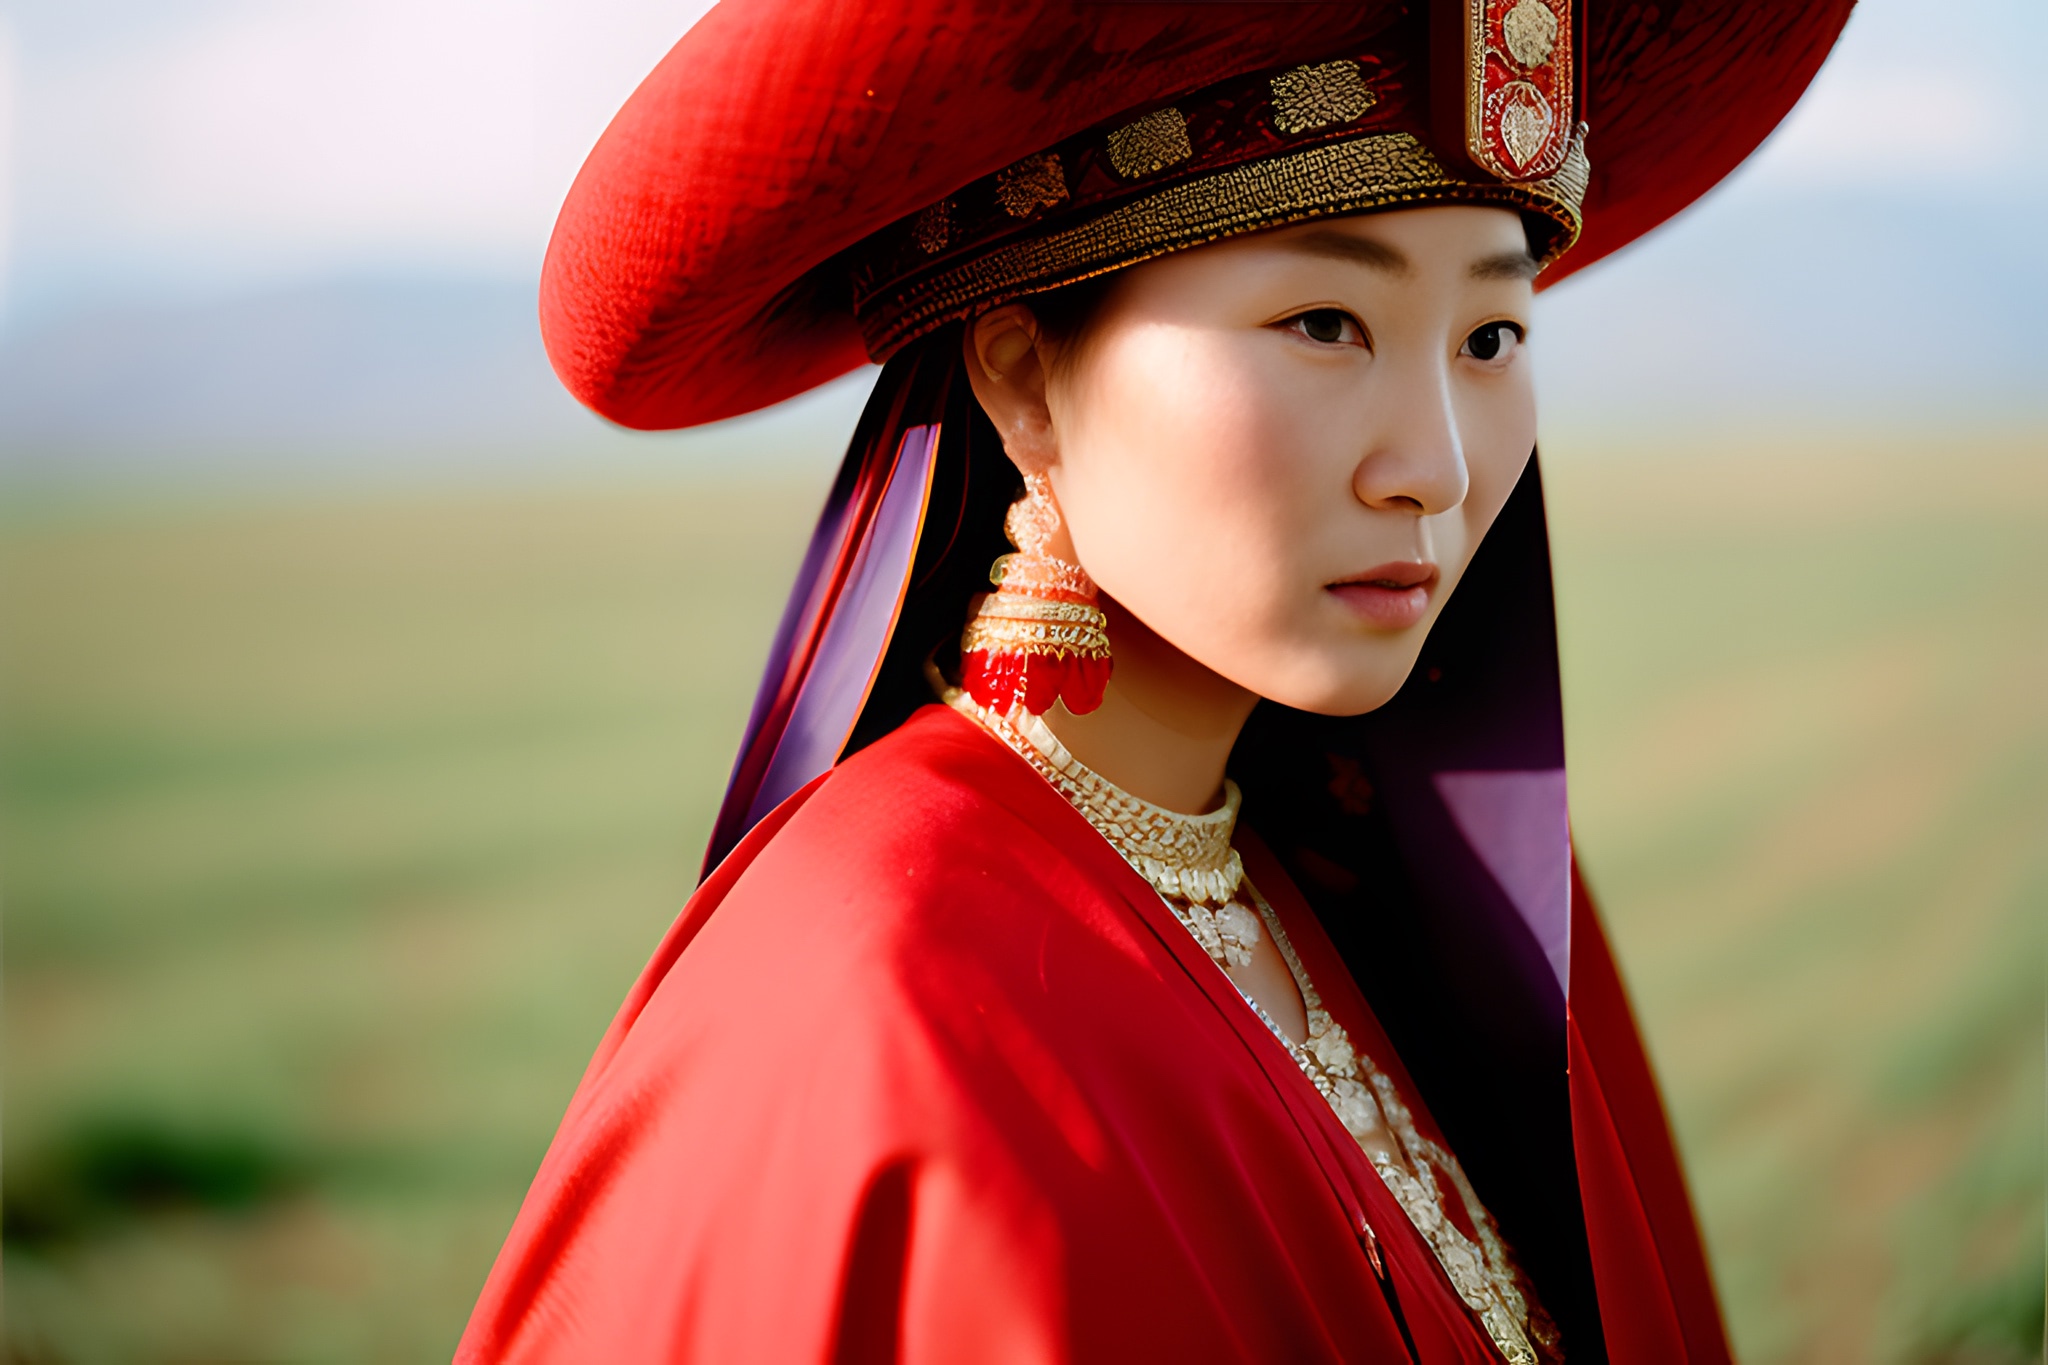 Mongolian girl with a coat made of the colorful feathers - 3 • VIARAMI